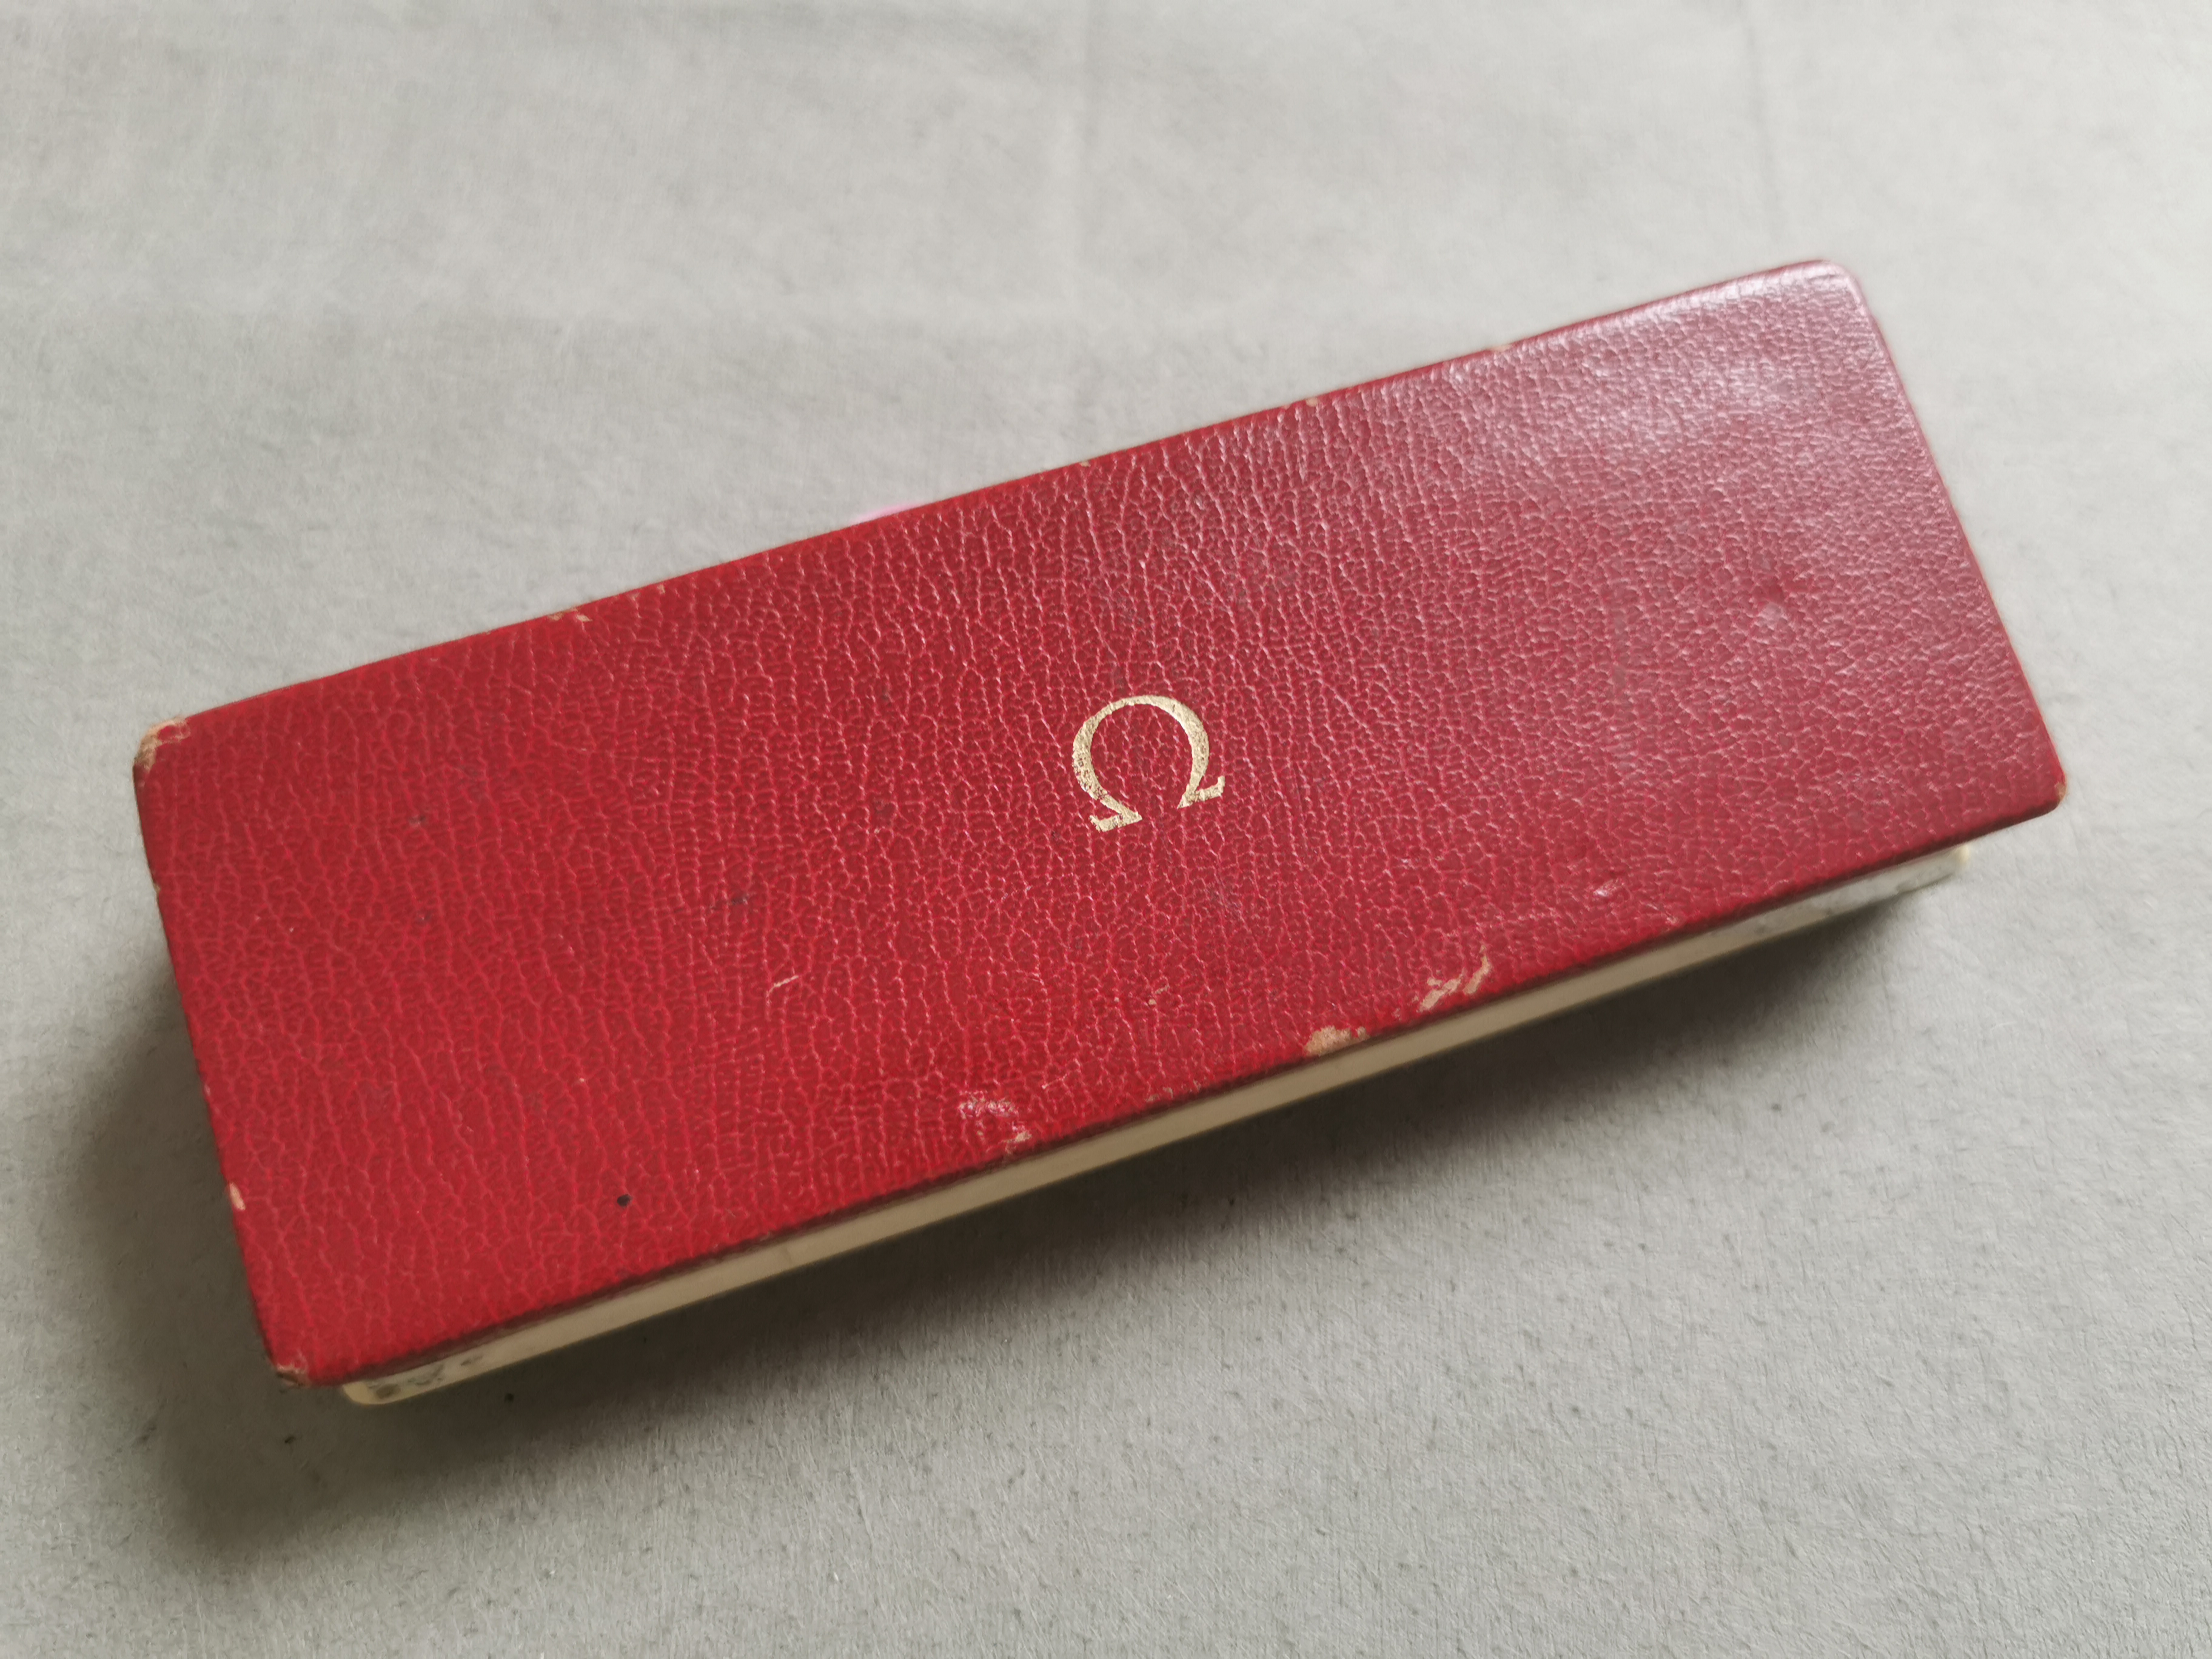 Omega vintage rare big watch box leather red for chrono or oversize models in good condition | San Giorgio a Cremano